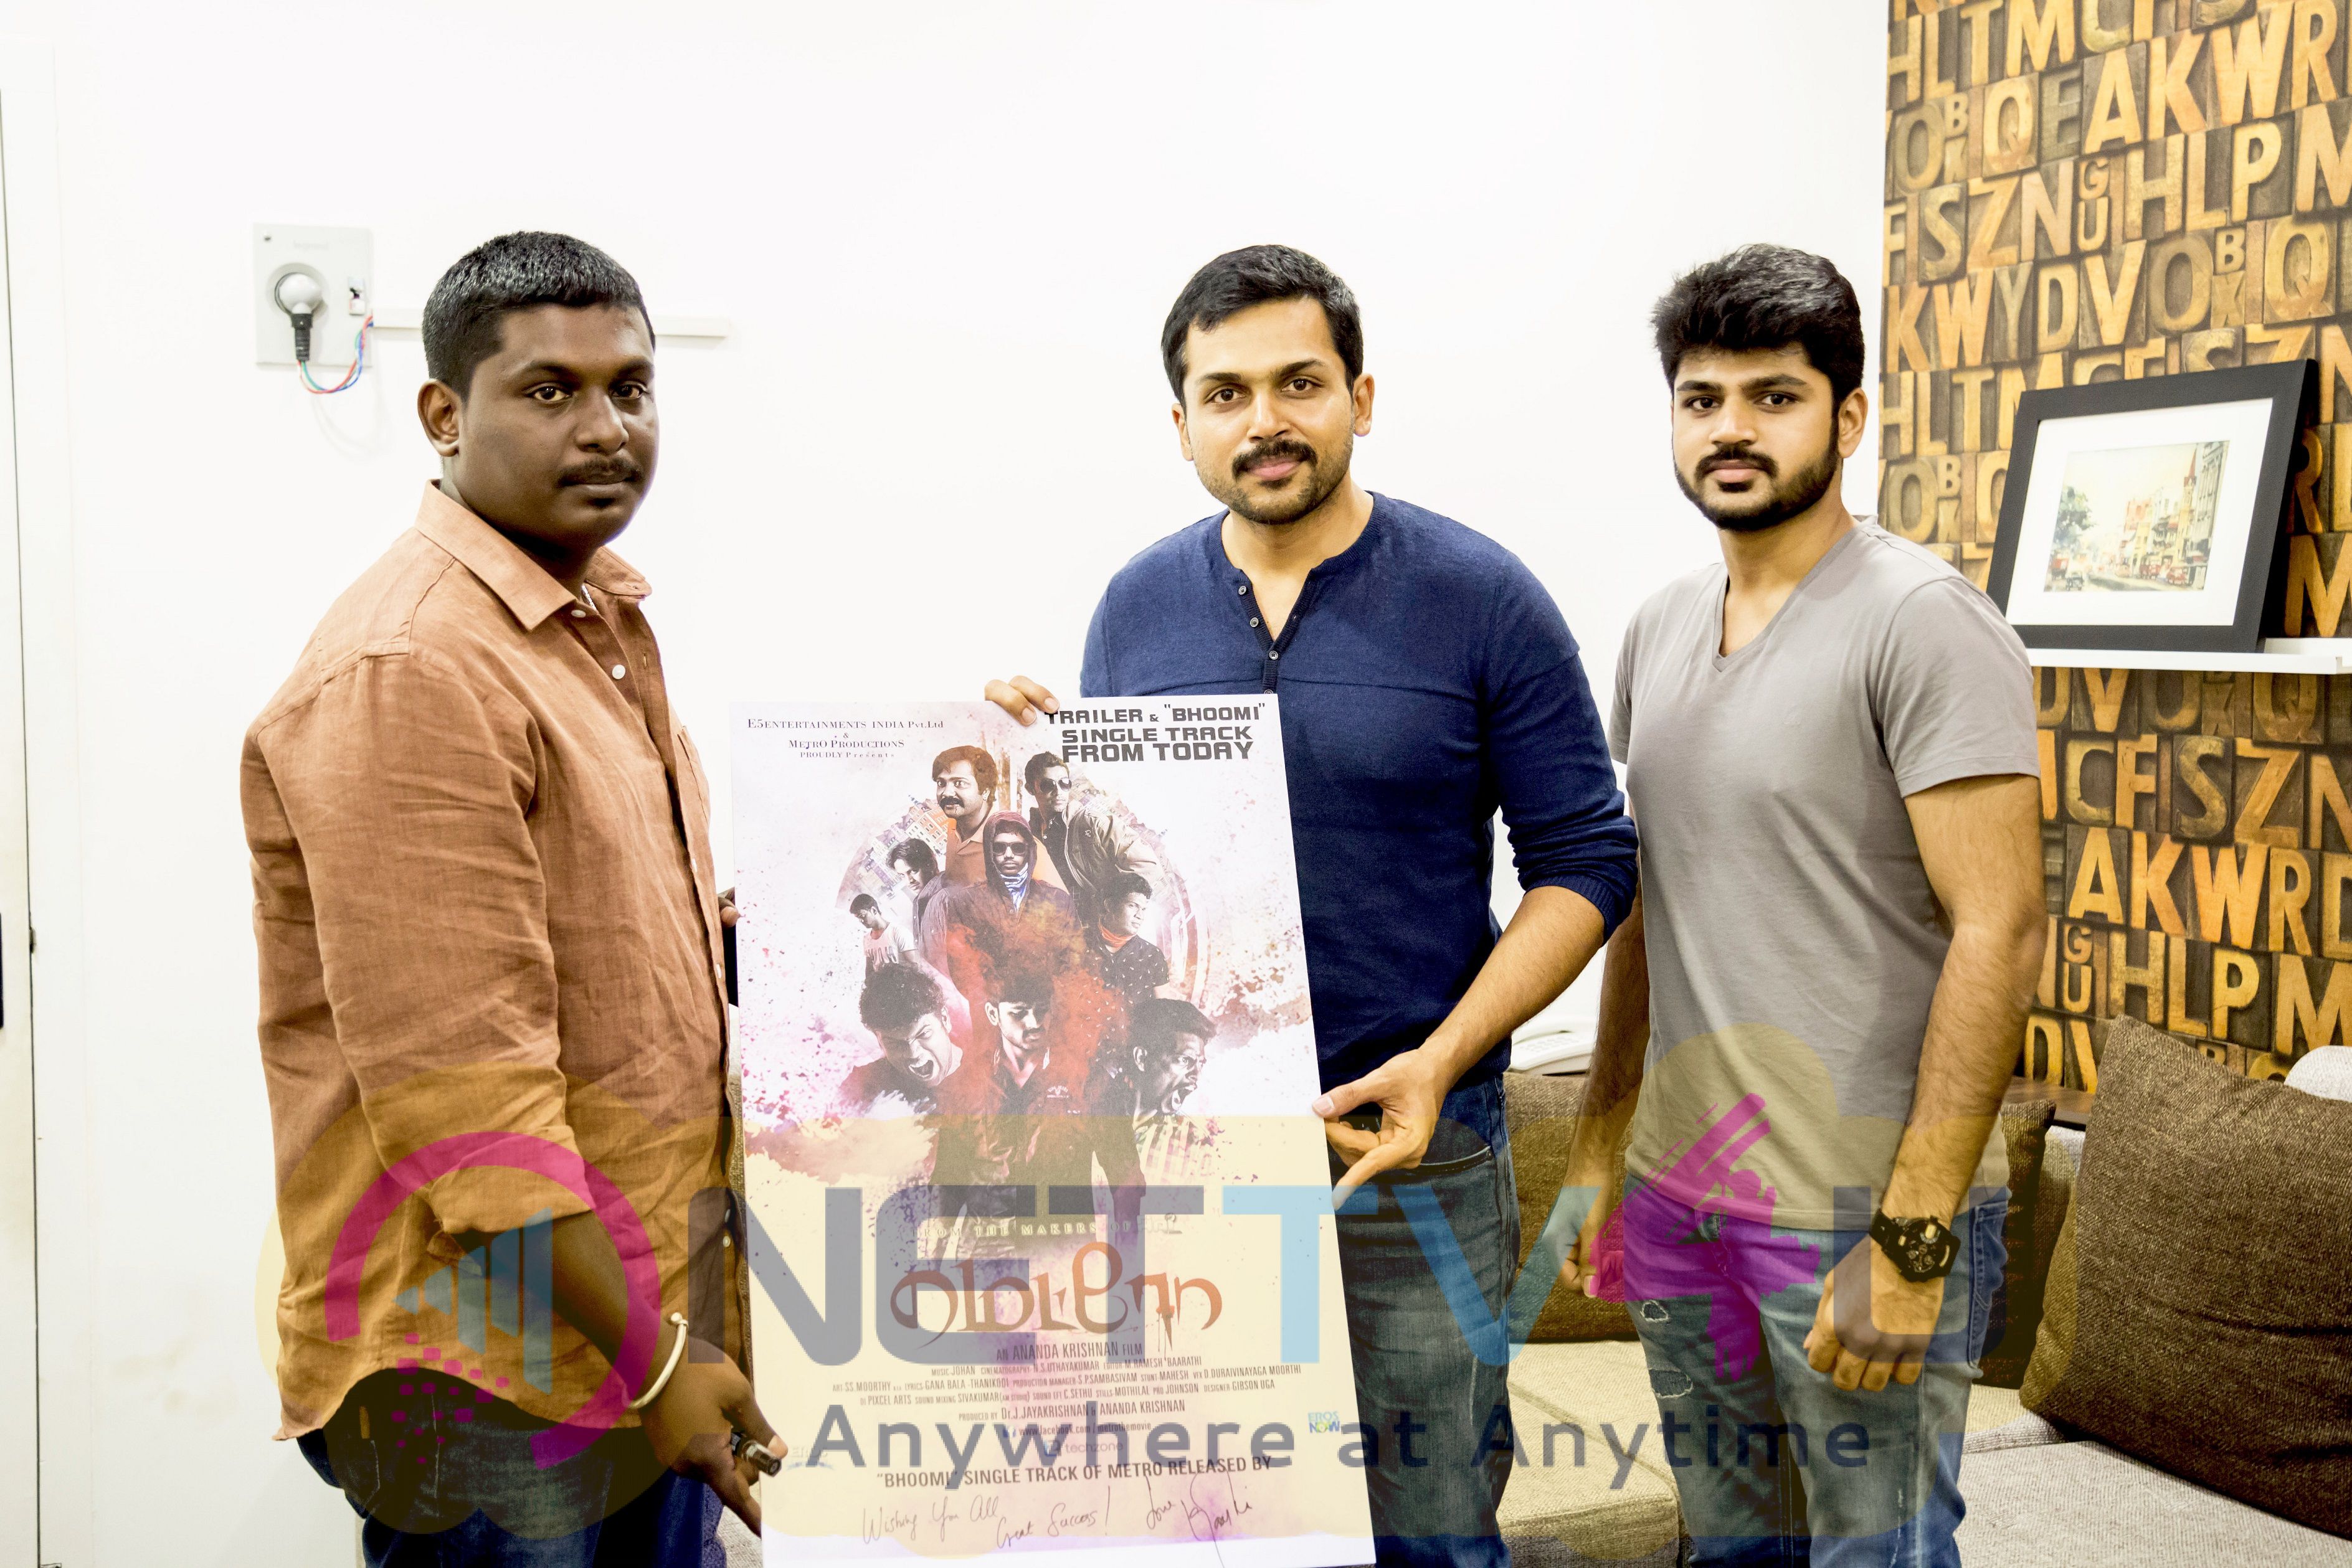  actor karthi launched lmetror movie  bhoomi  song sung by gana bala still images 1